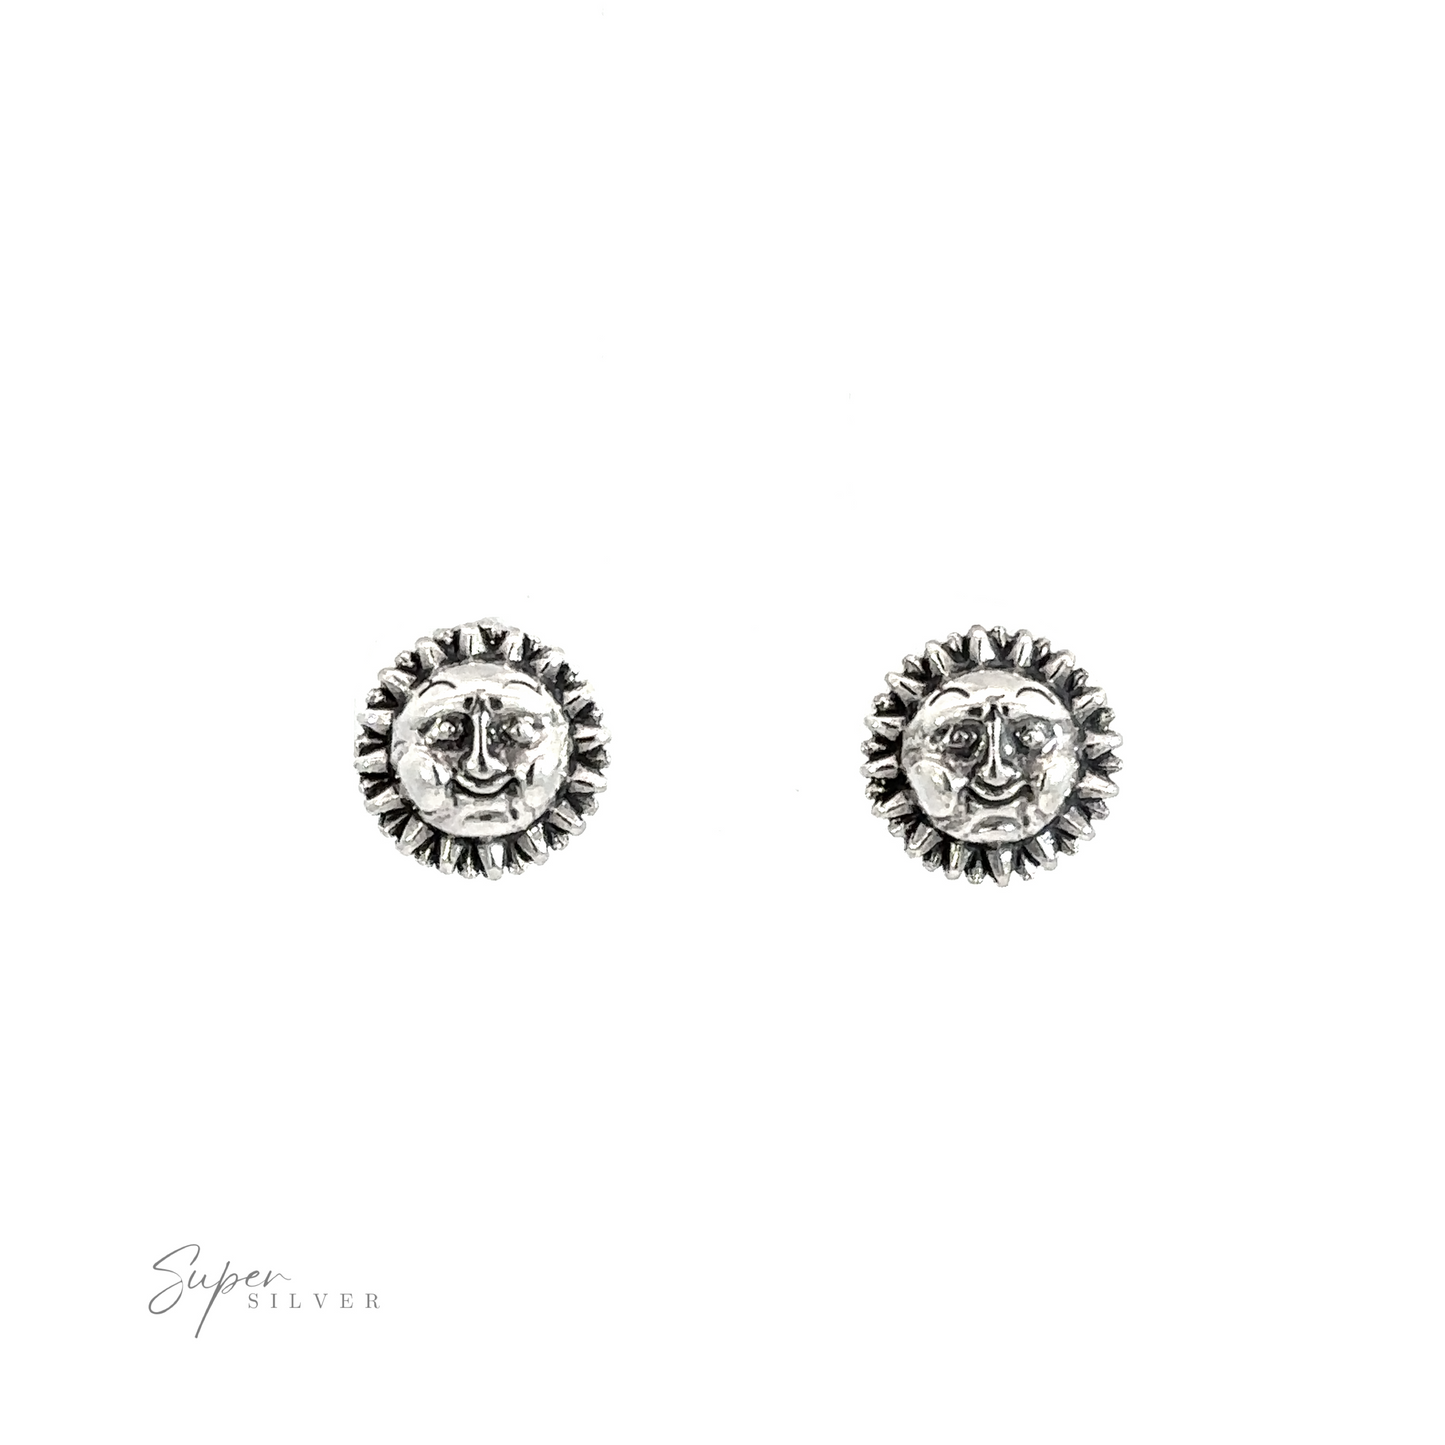 A pair of Sun with Face stud earrings featuring celestial charm, showcased on a white background.